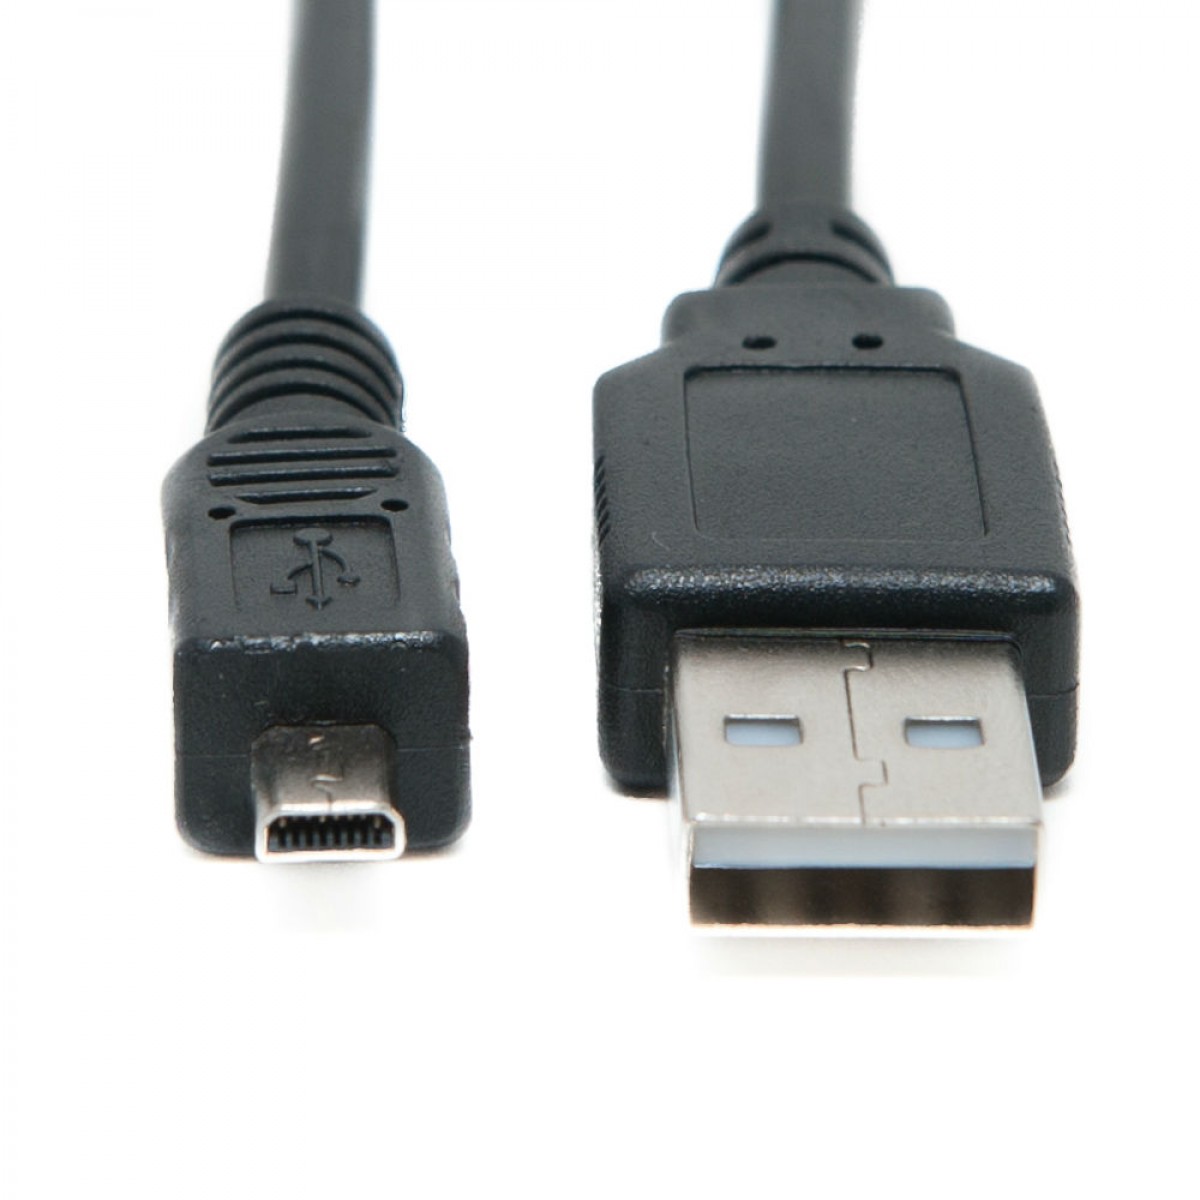 regelmatig Hechting droog Fujifilm FinePix S1700 Camera USB Cable - A Perfect Replacement for the  Original Fujifilm Digital Camera USB Cable | Keple.com